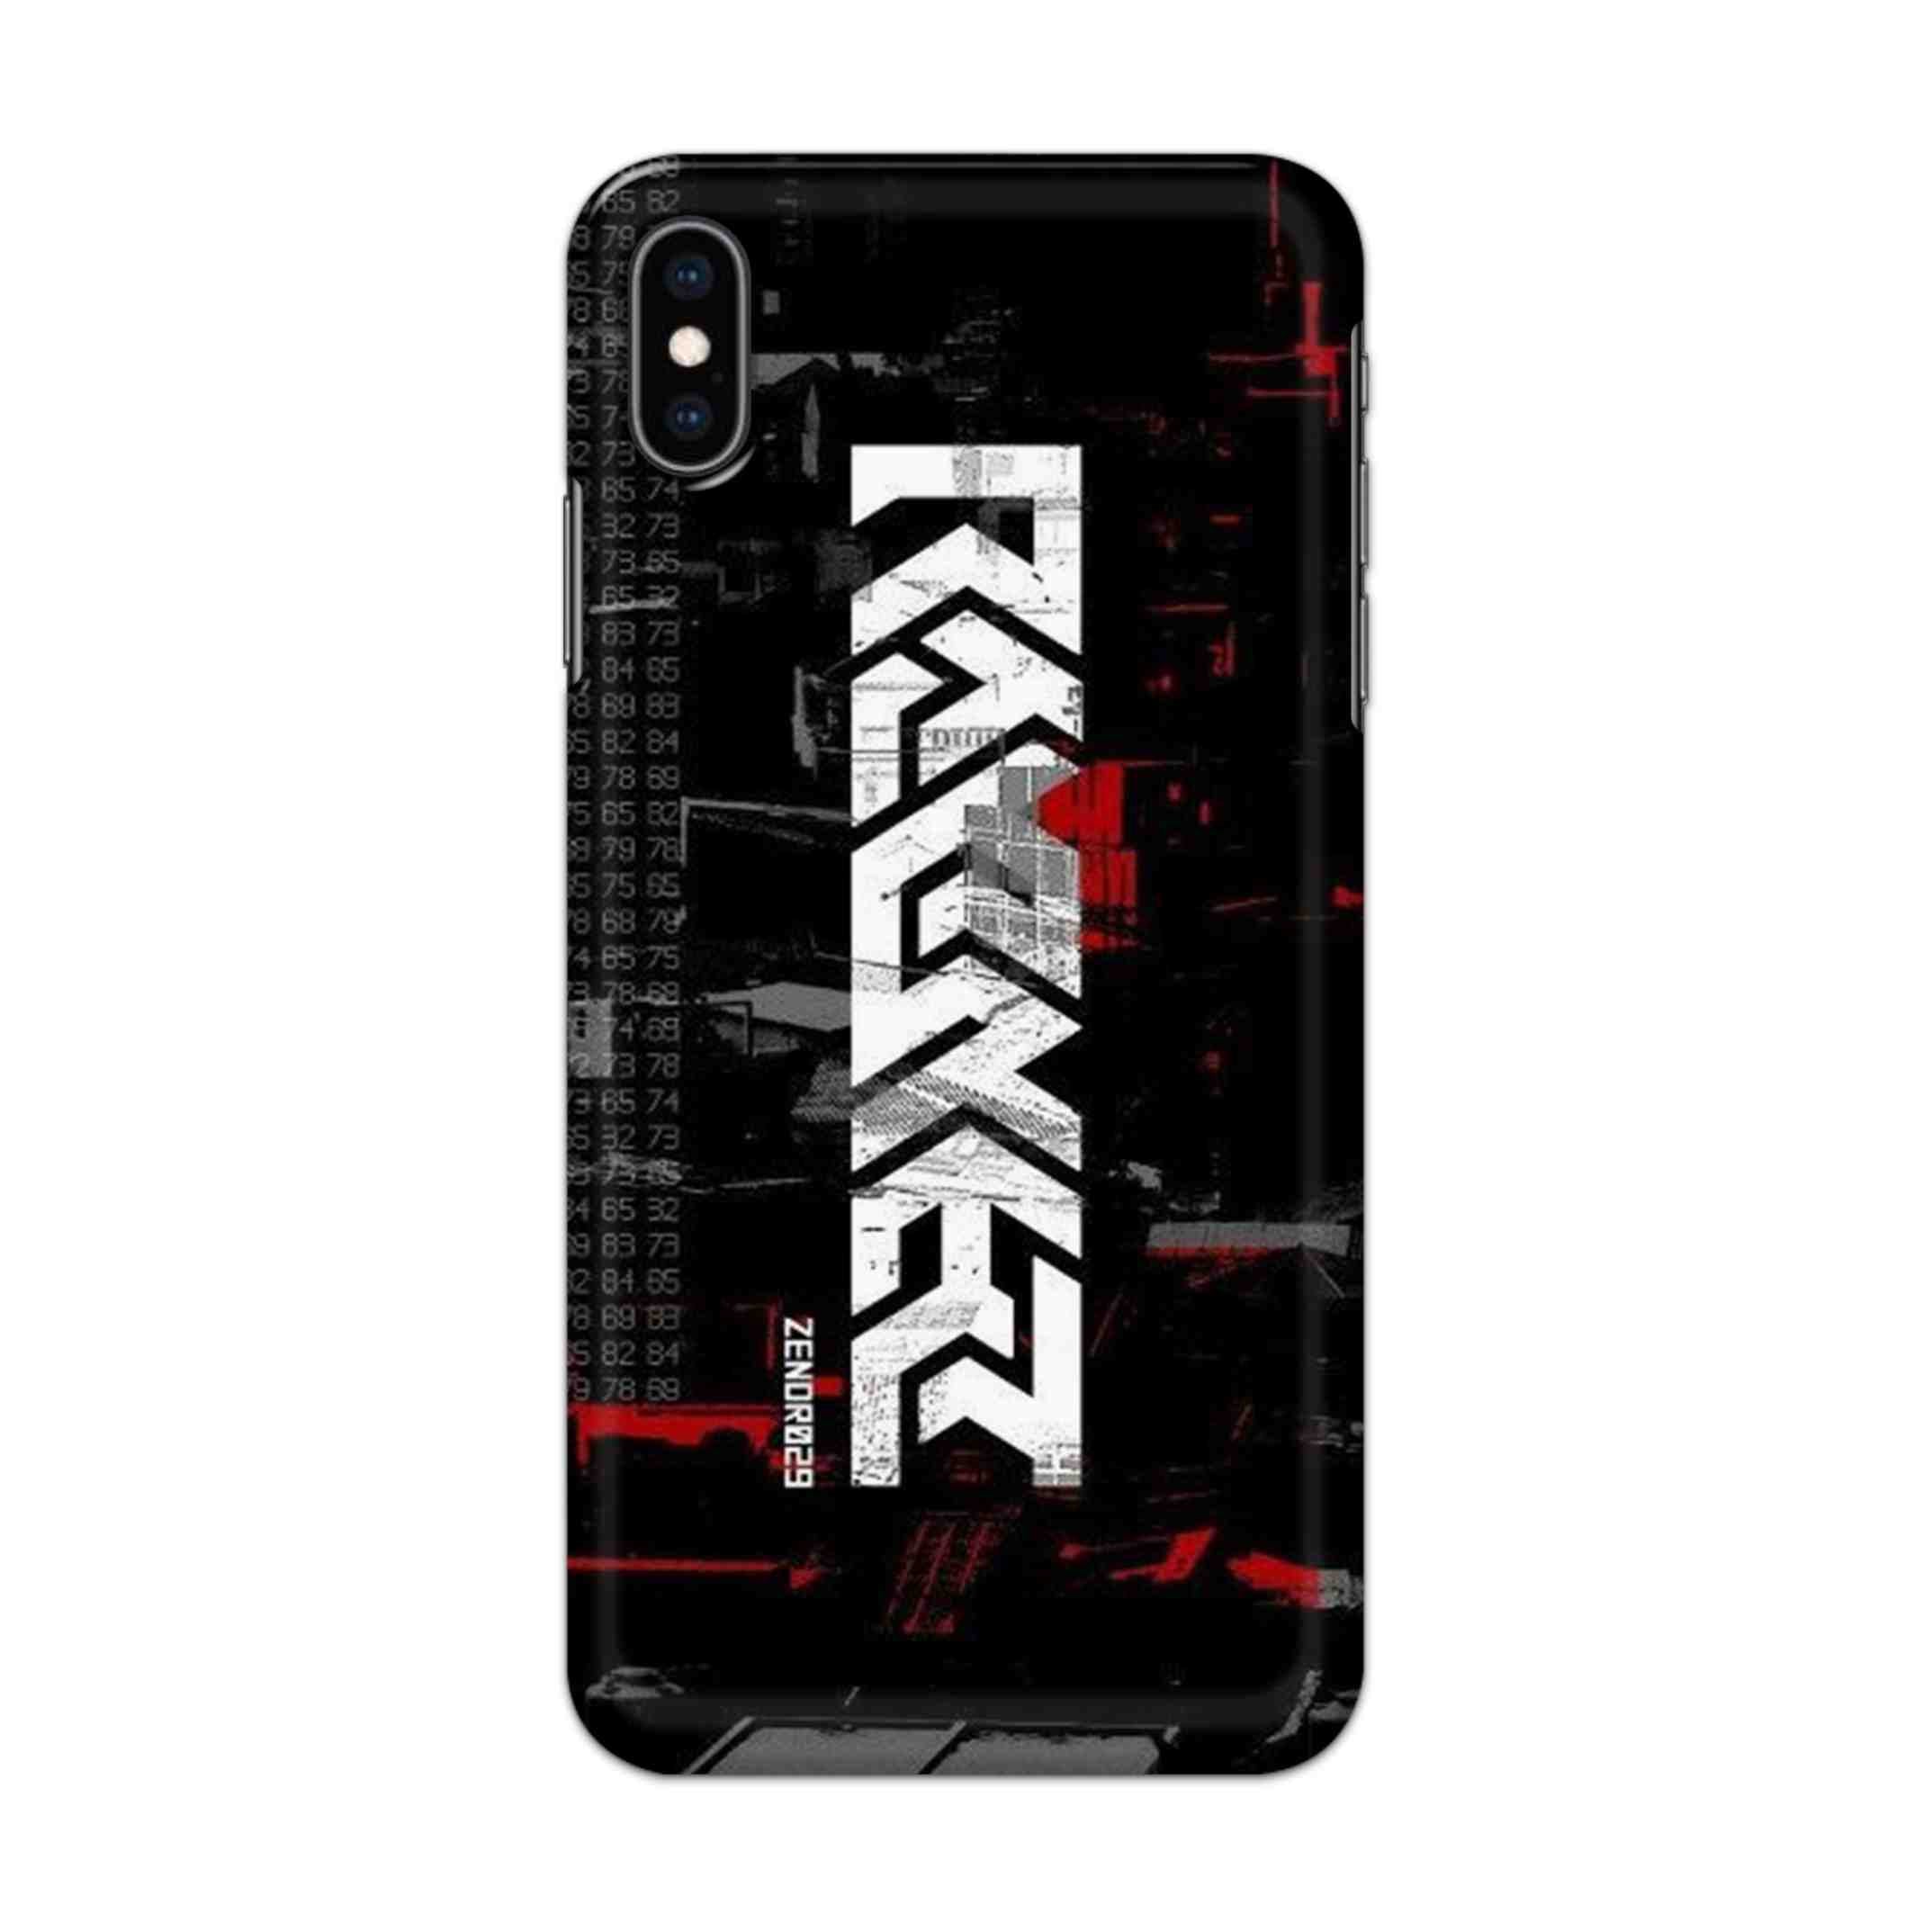 Buy Raxer Hard Back Mobile Phone Case/Cover For iPhone XS MAX Online